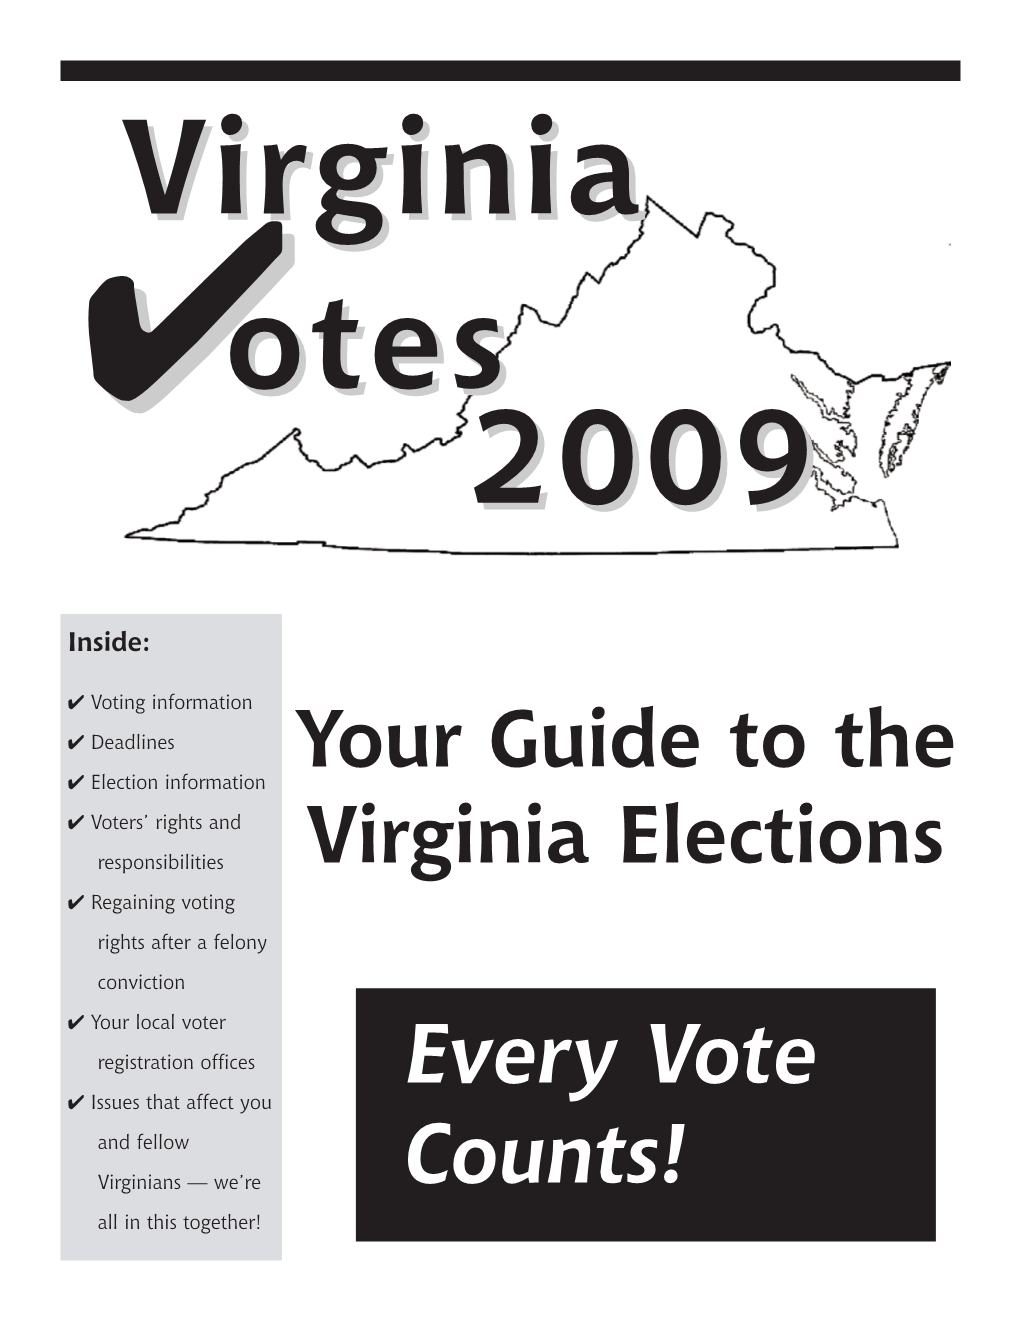 Every Vote Counts! 2009 Voter Guide to the Virginia Election the Virginia Organizing Project Is Proud to Present This 2009 Voter Guide to the Virginia Election